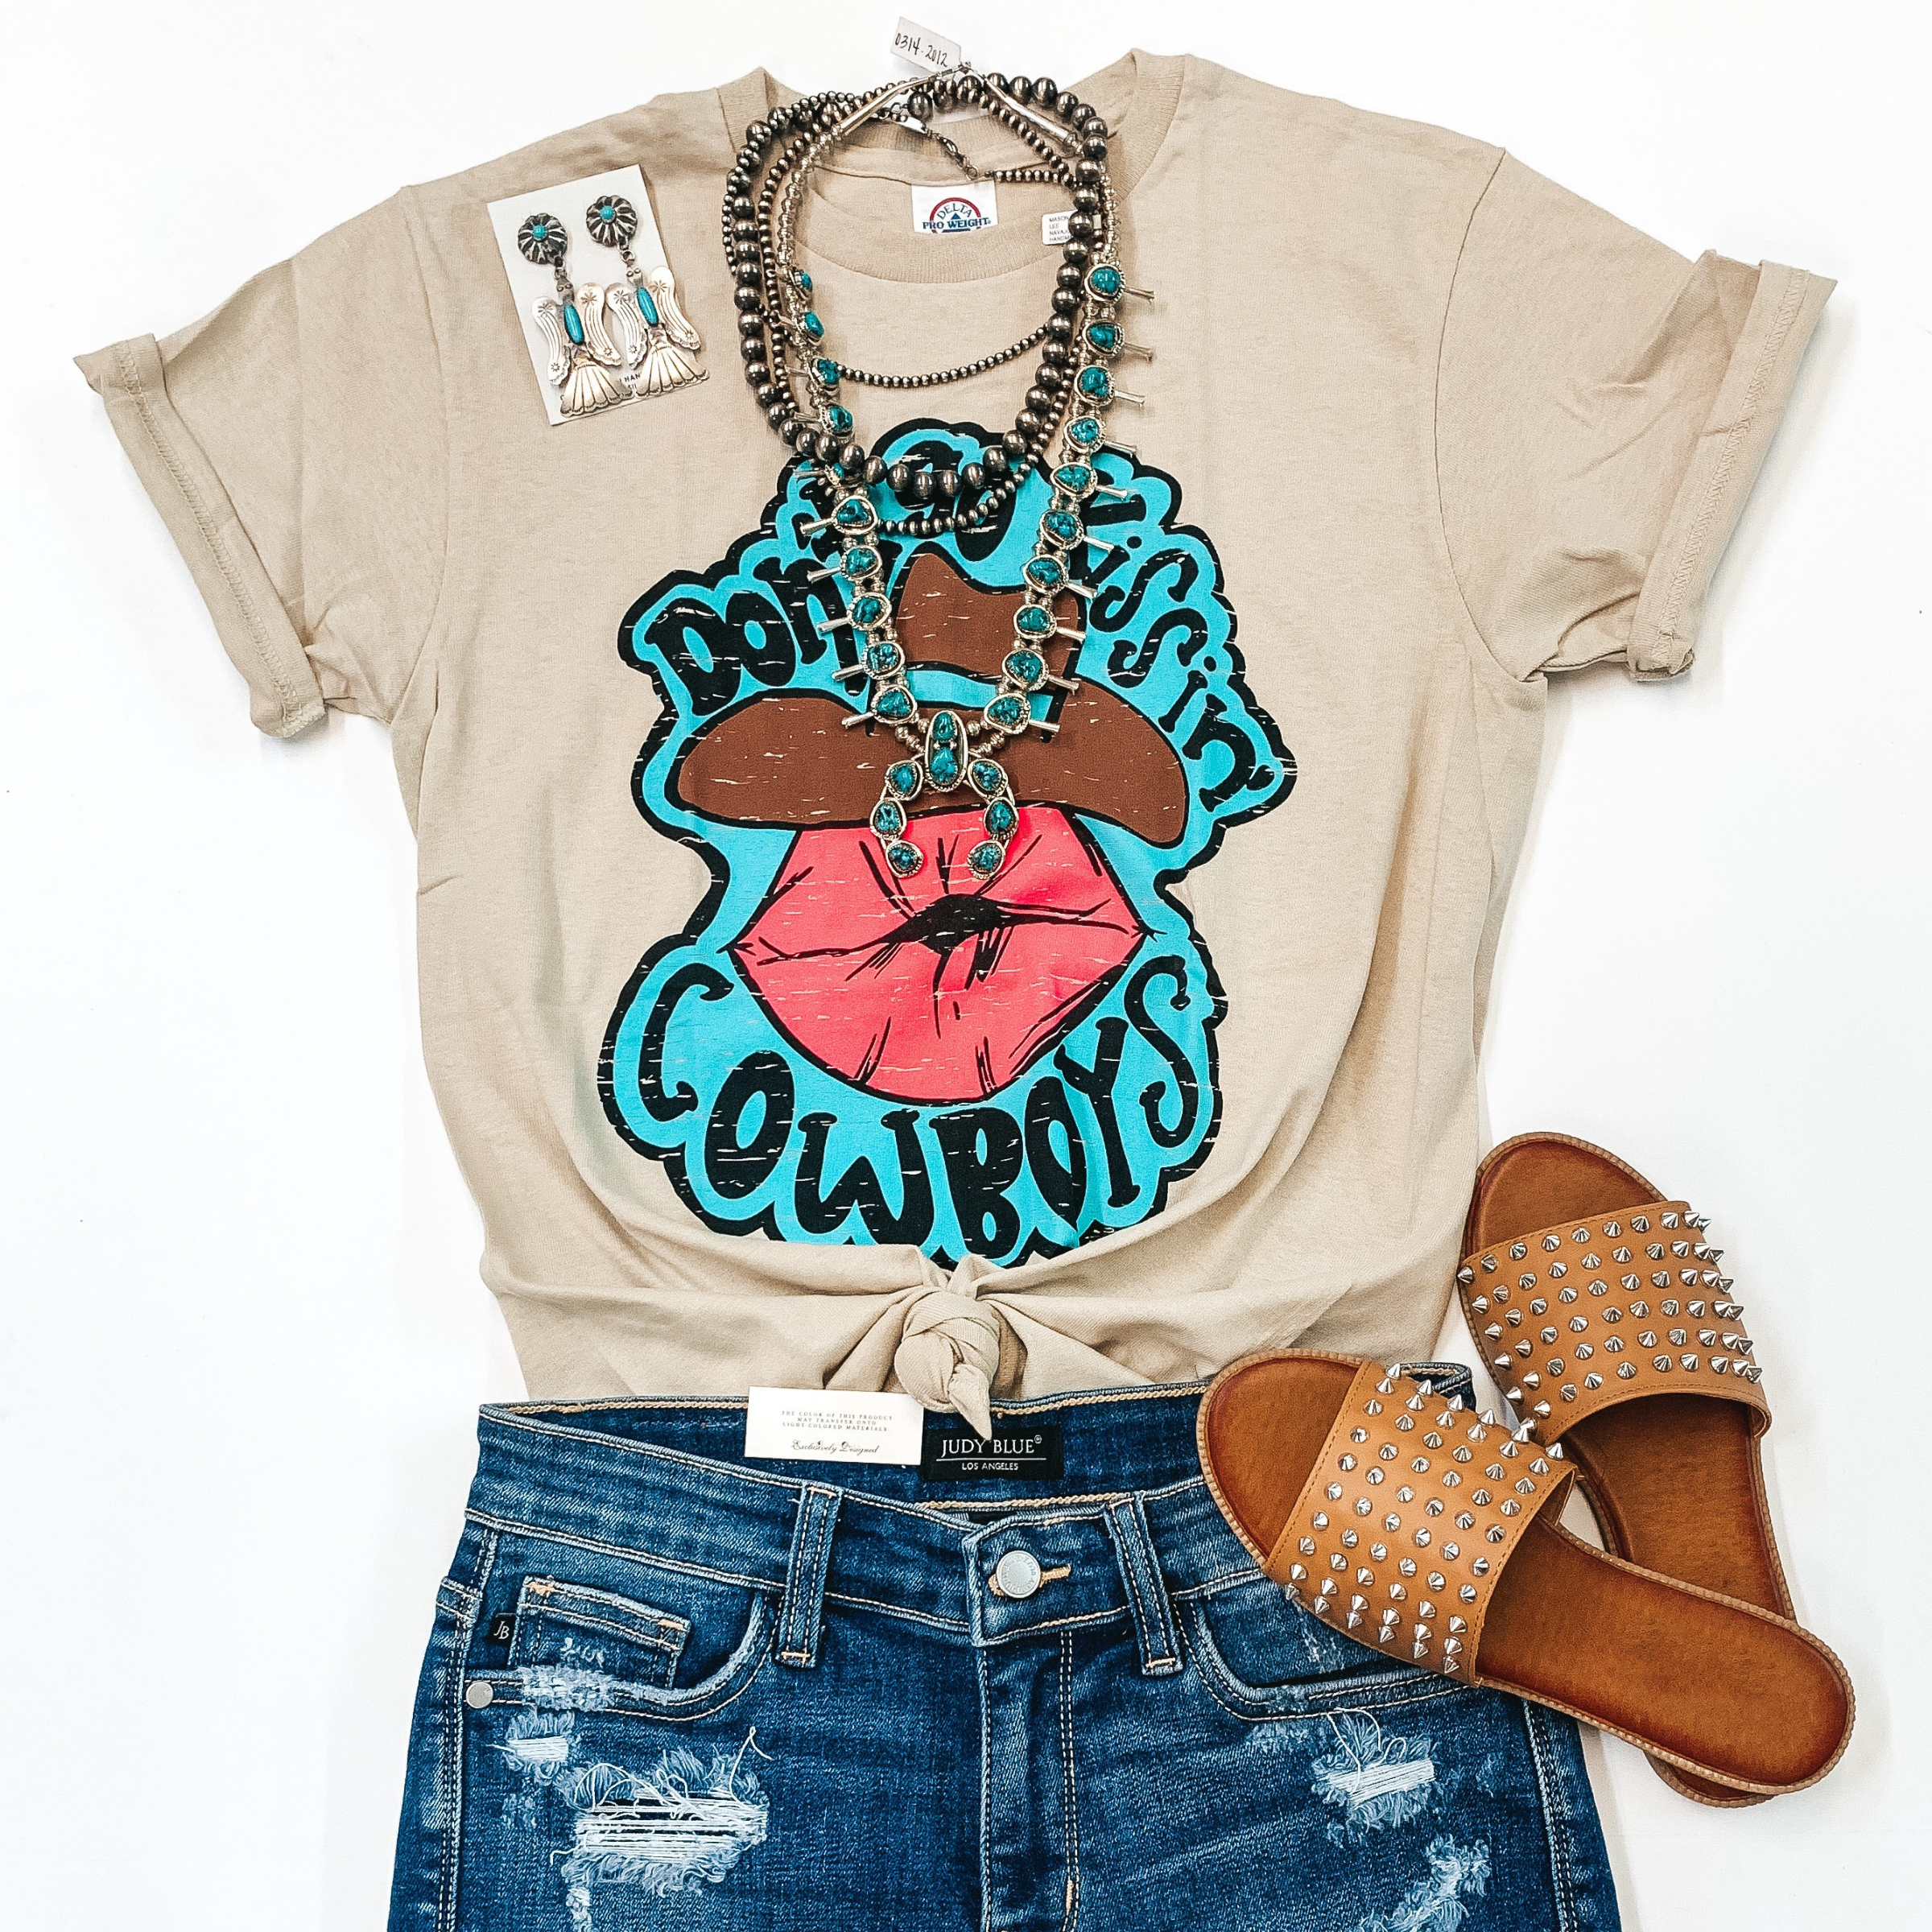 A beige tee shirt with a graphic that says " Don't Go Kissing Cowboys." Pictured with denim shorts, tan sandals, and genuine Navajo jewelry.